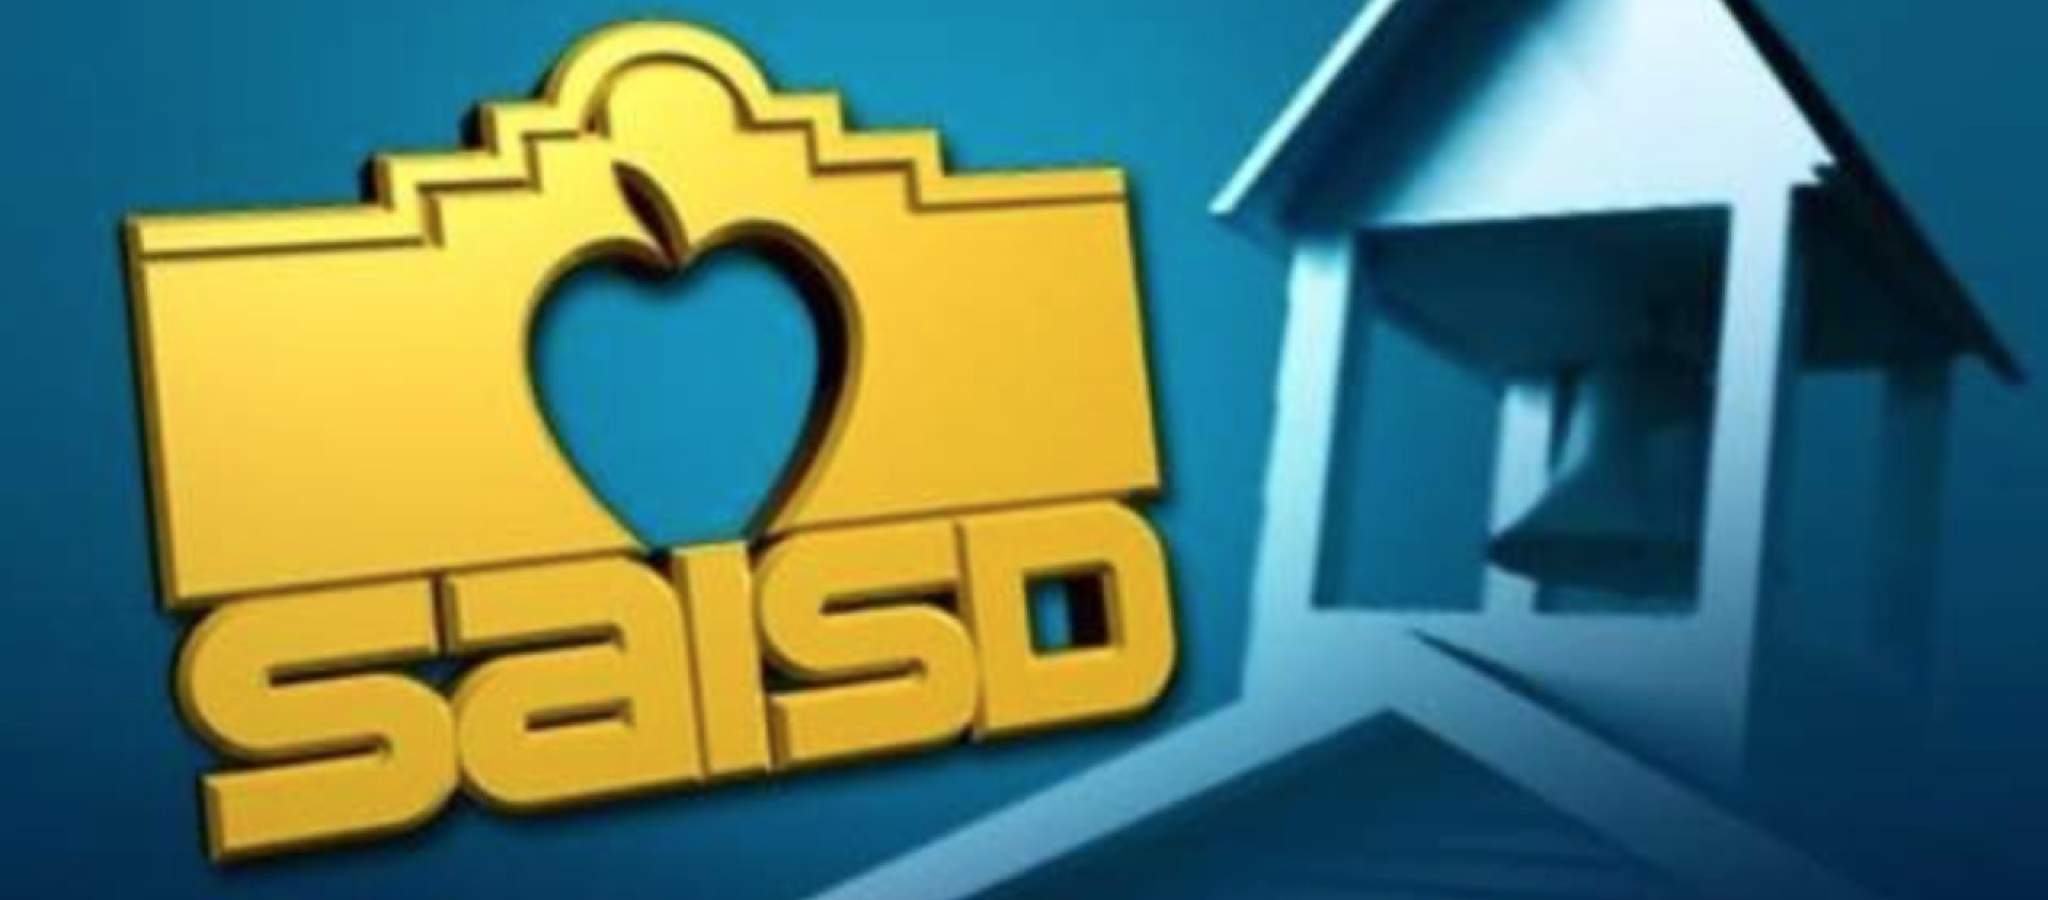 San Antonio ISD holds mass COVID-19 vaccination event for all district employees